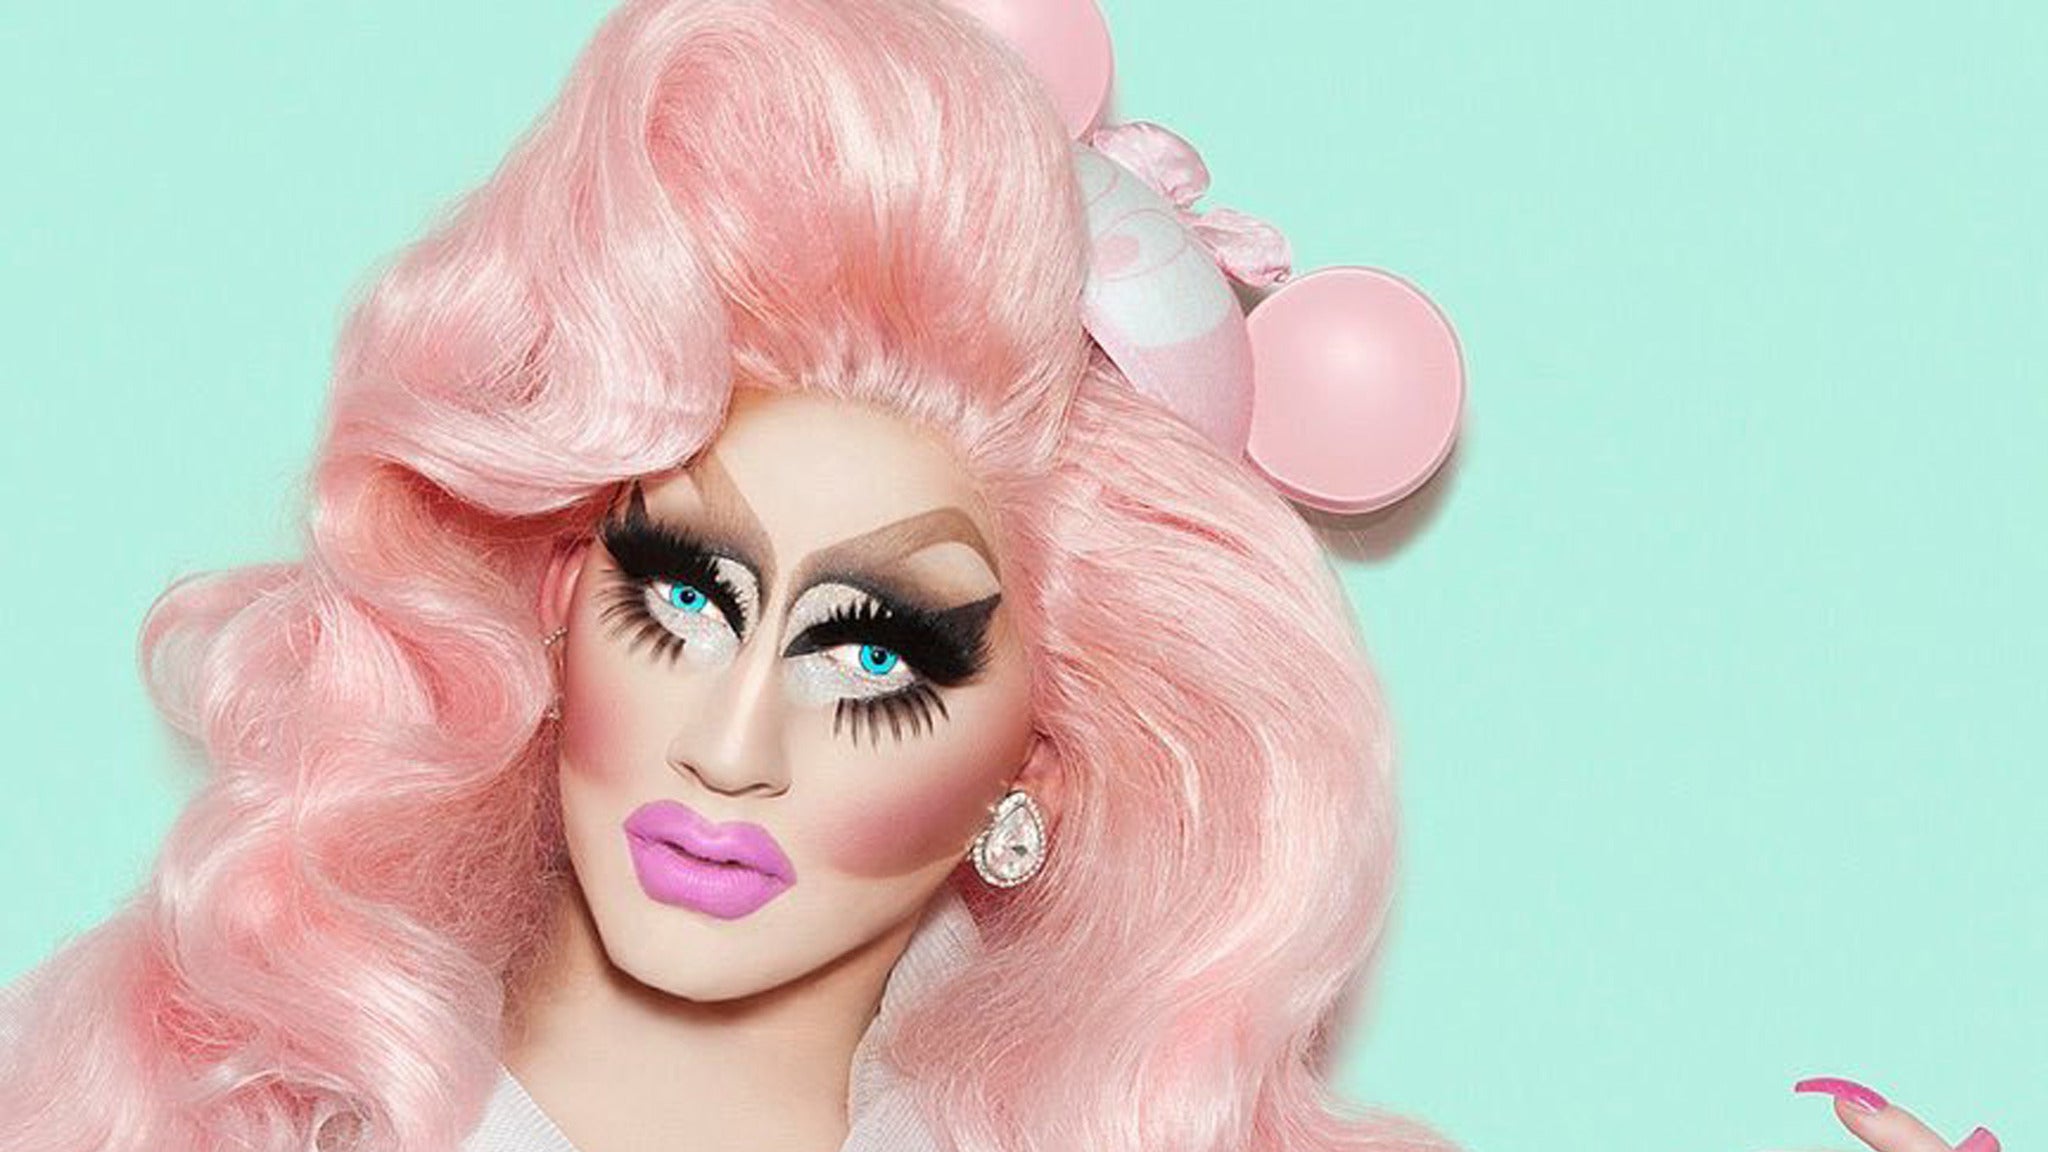 Trixie Mattel: Grown Up in Ft Lauderdale promo photo for Artist presale offer code